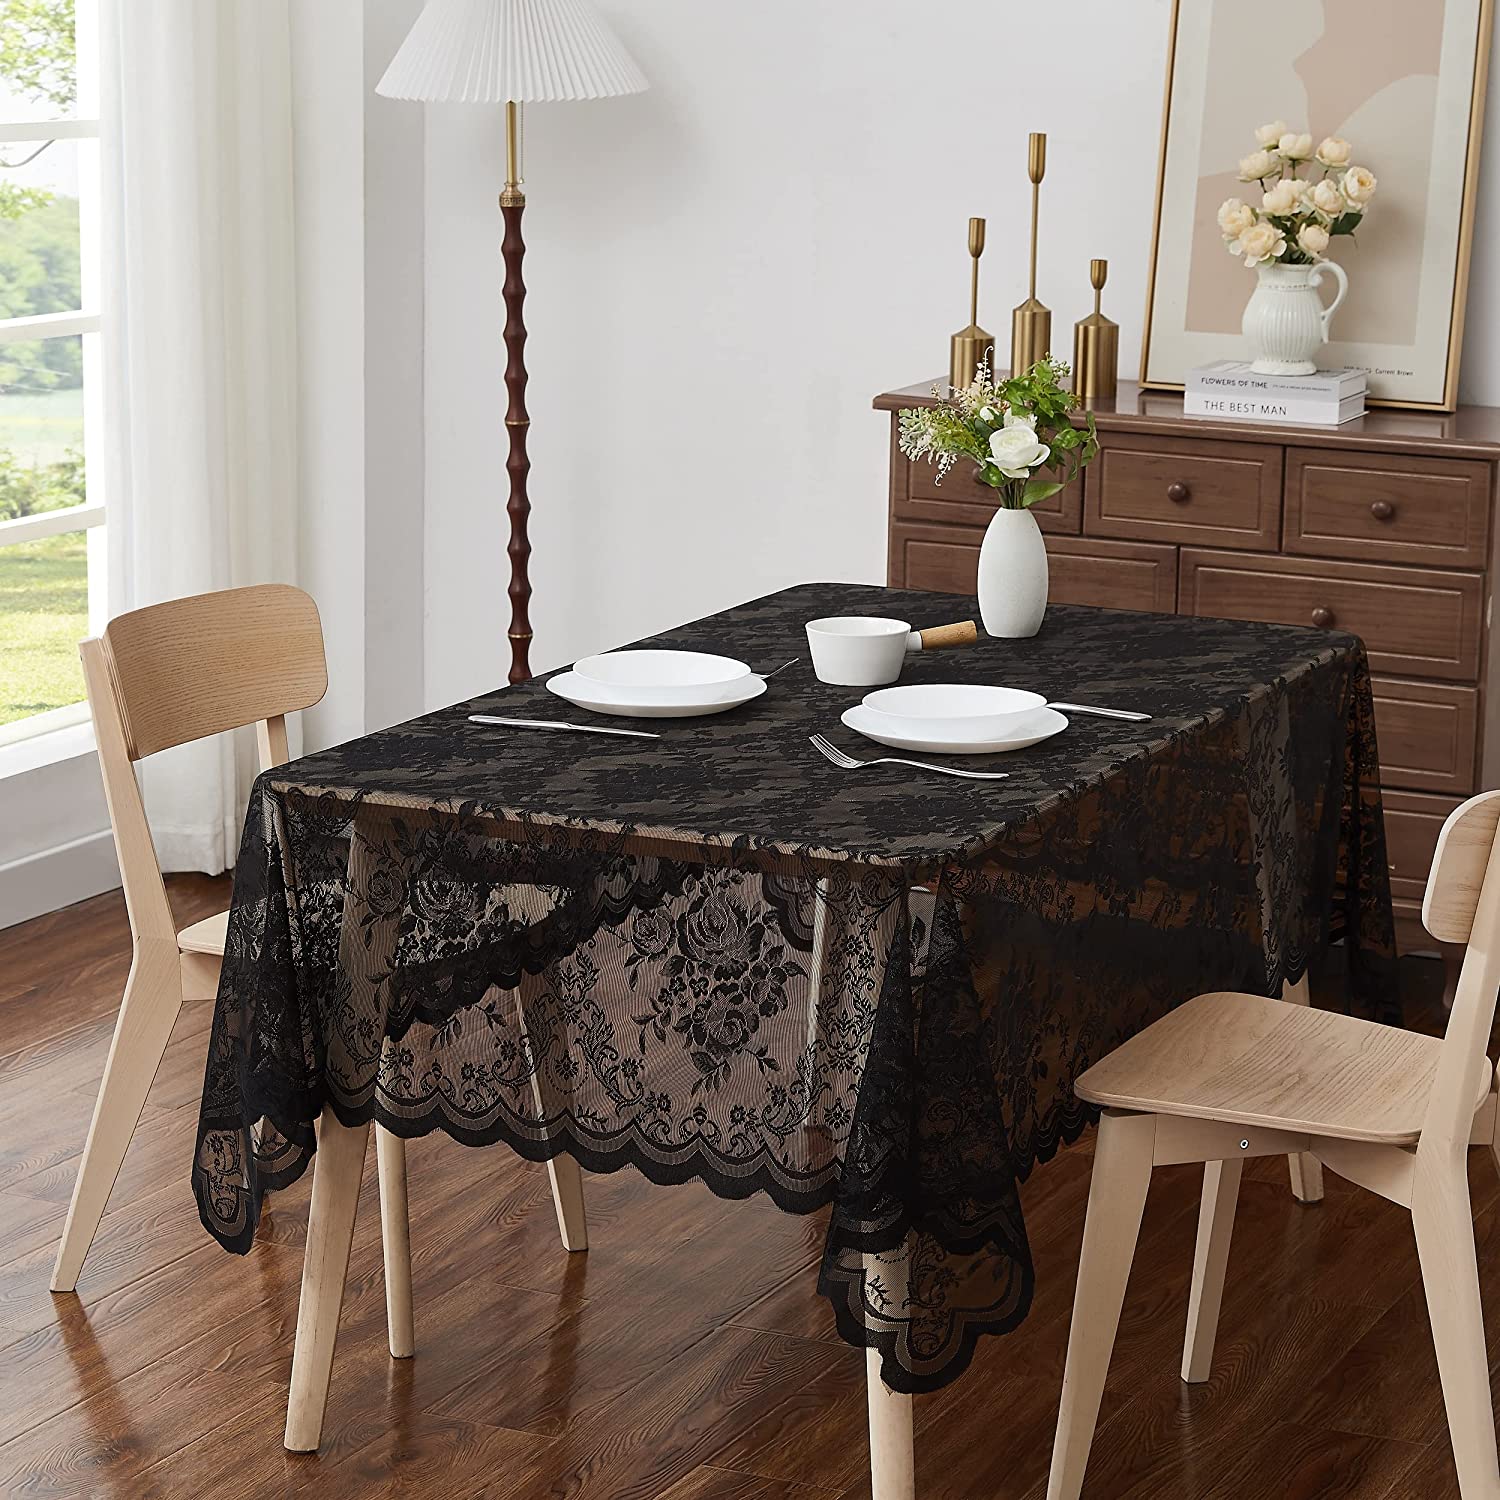 Warm Home Designs 54 x 72 Lace Tablecloth. White Rectangle Tablecloth with English Rose Design. Rectangular Tablecloth, Rustic Tablecloth or Dining